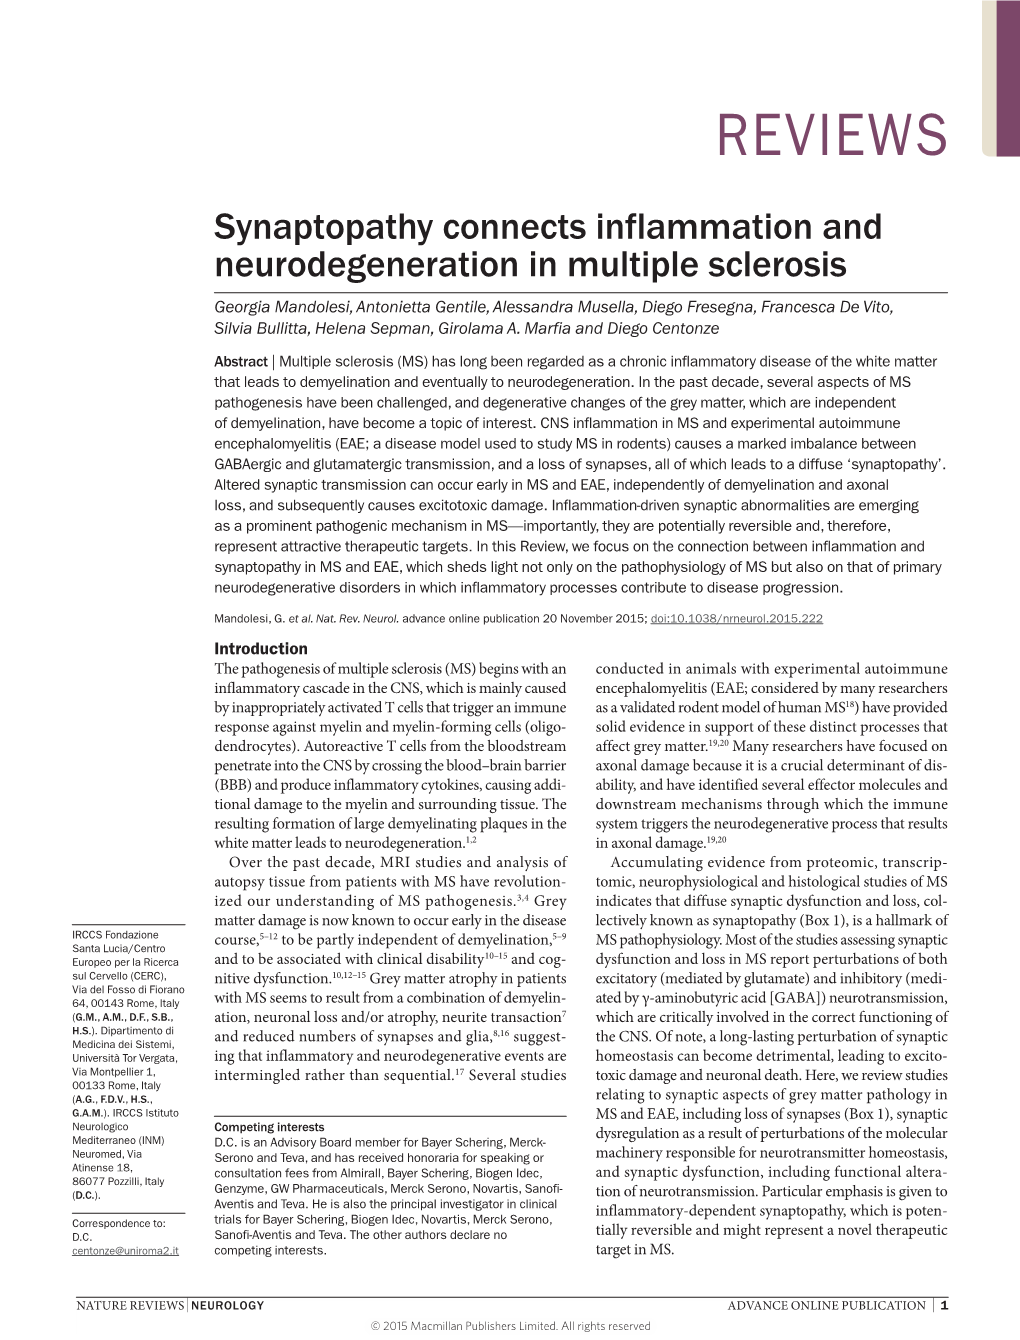 Synaptopathy Connects Inflammation and Neurodegeneration in Multiple